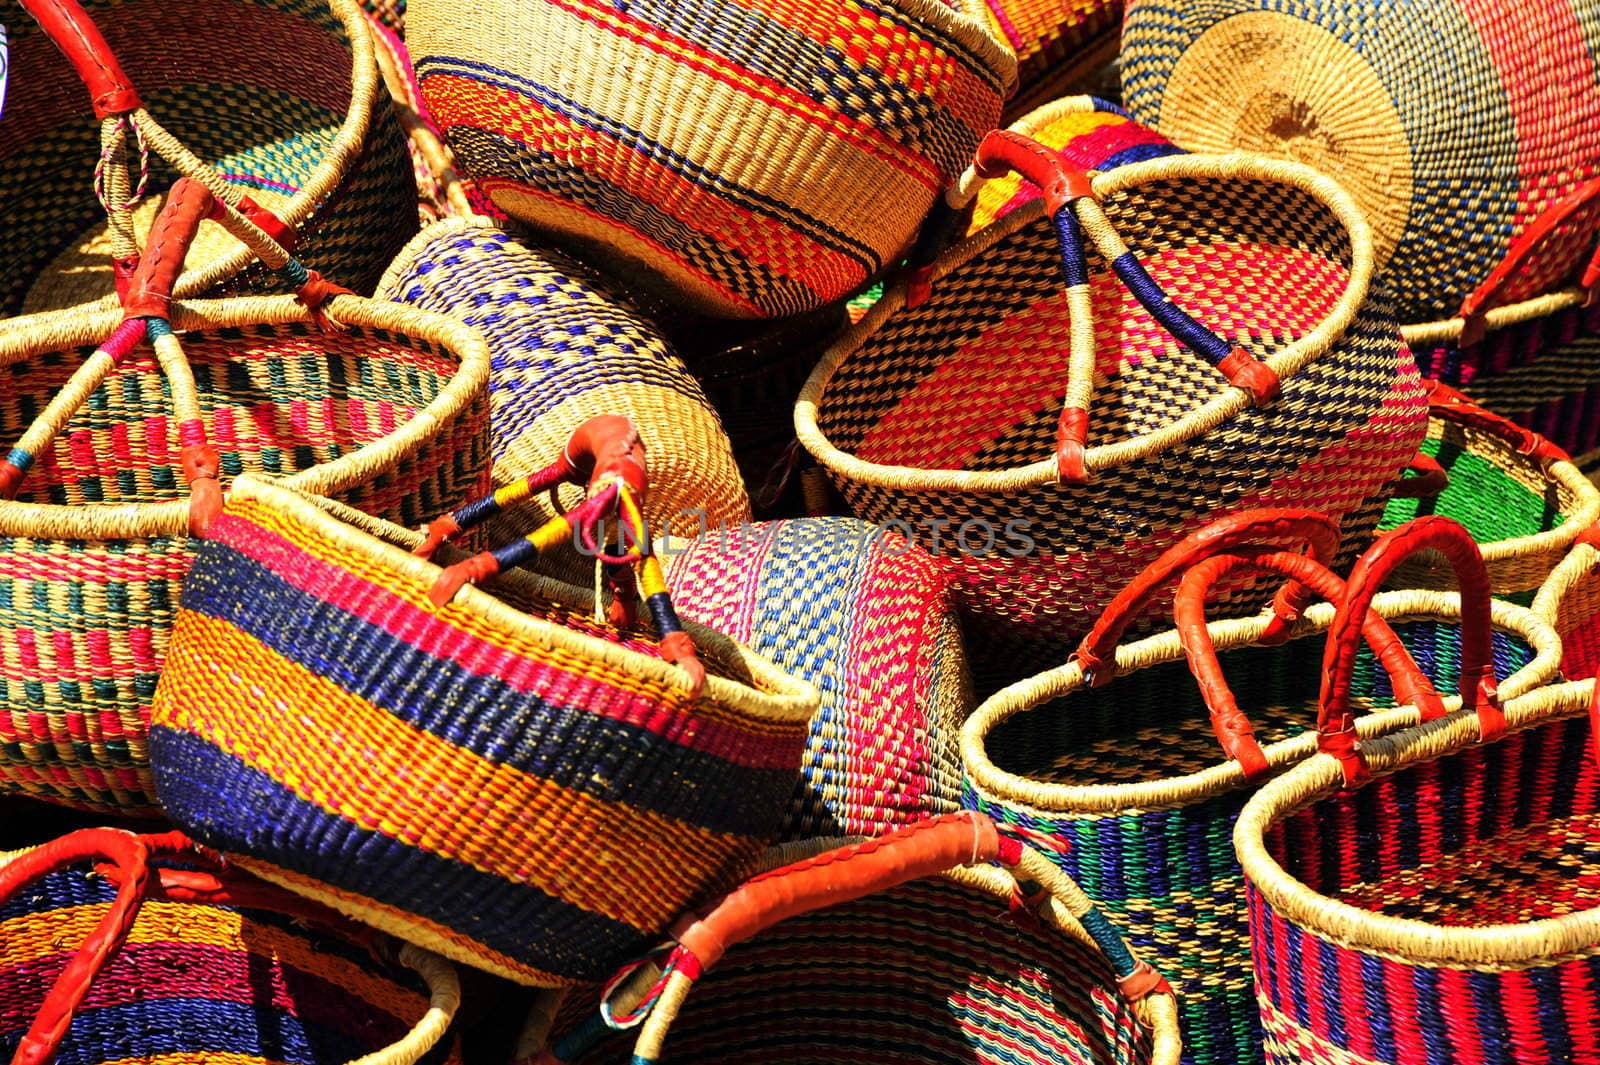 Mexican baskets in a public market in mexico.